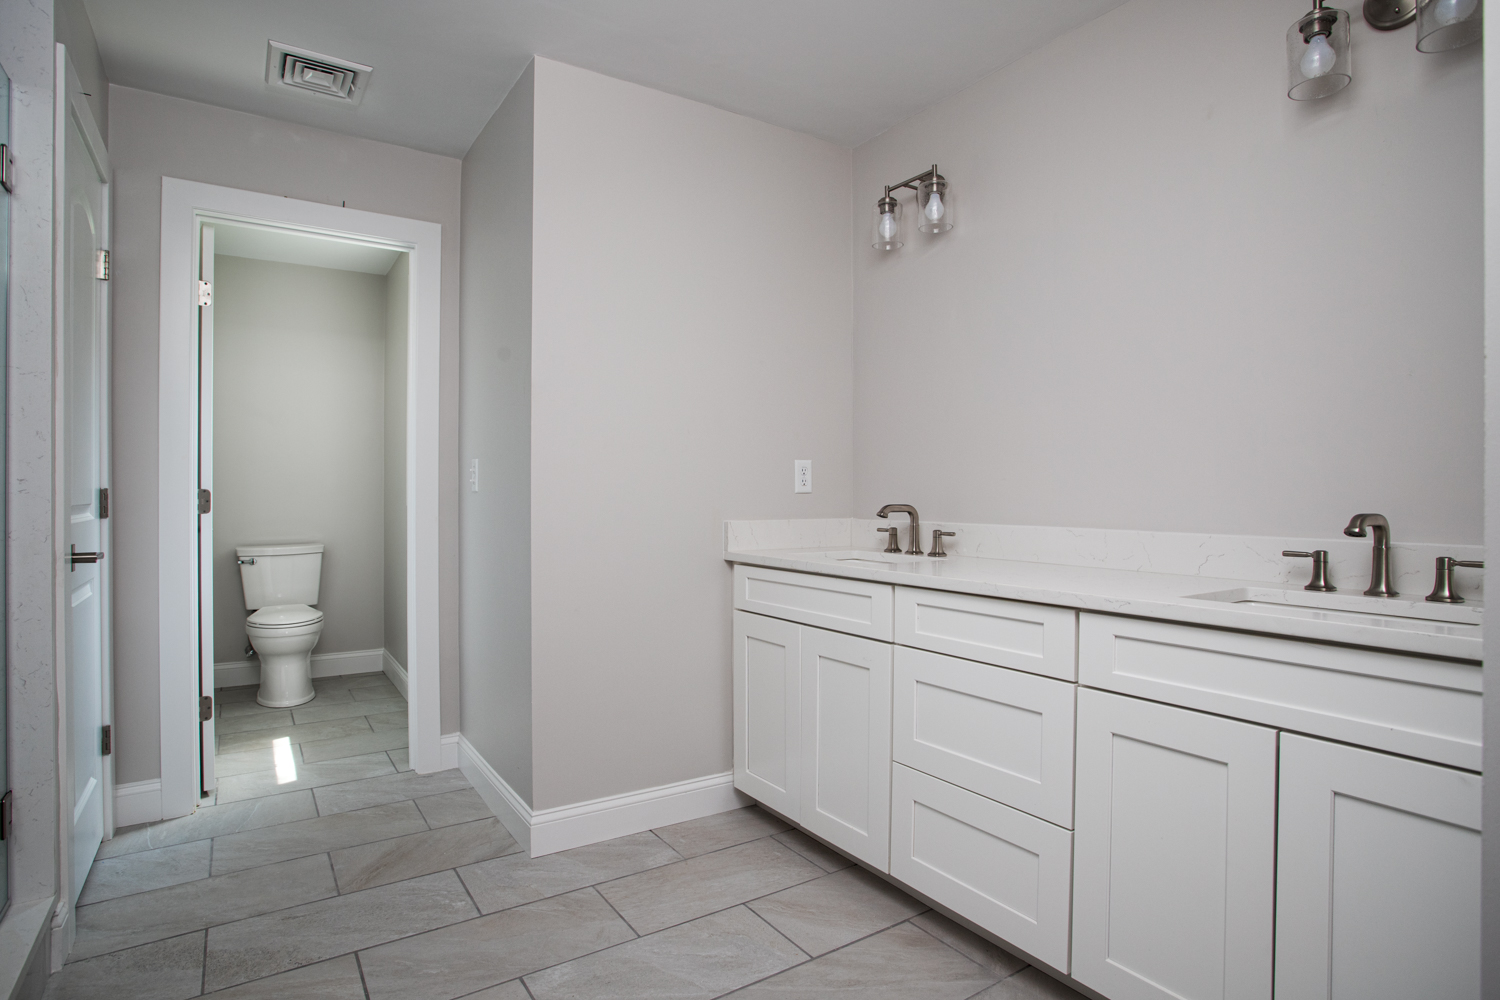 Wash area with white walls and white cabinets